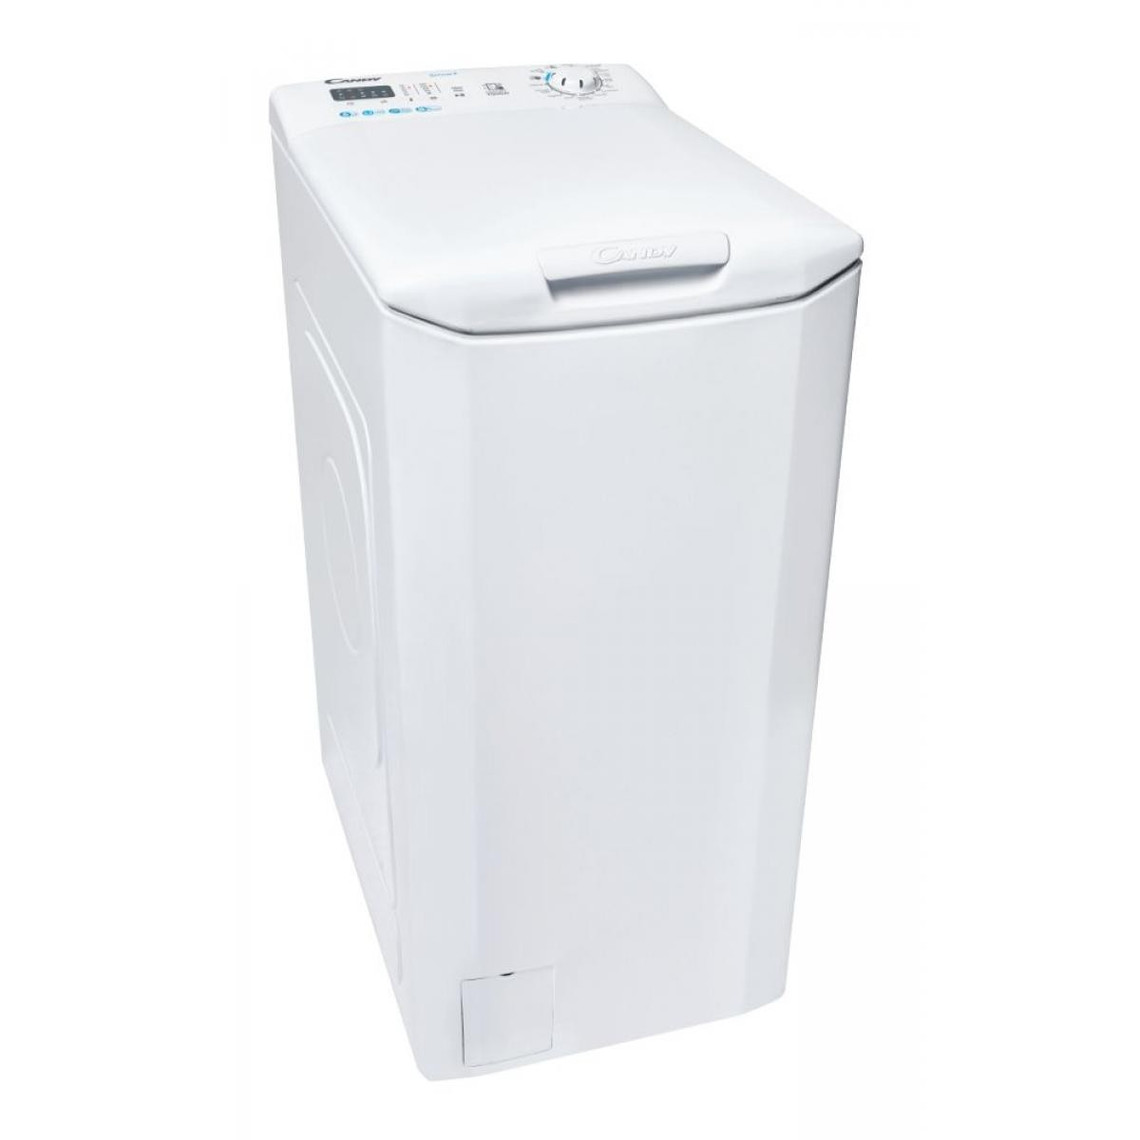 Candy Candy Smart CST 46LE/1-47 washing machine